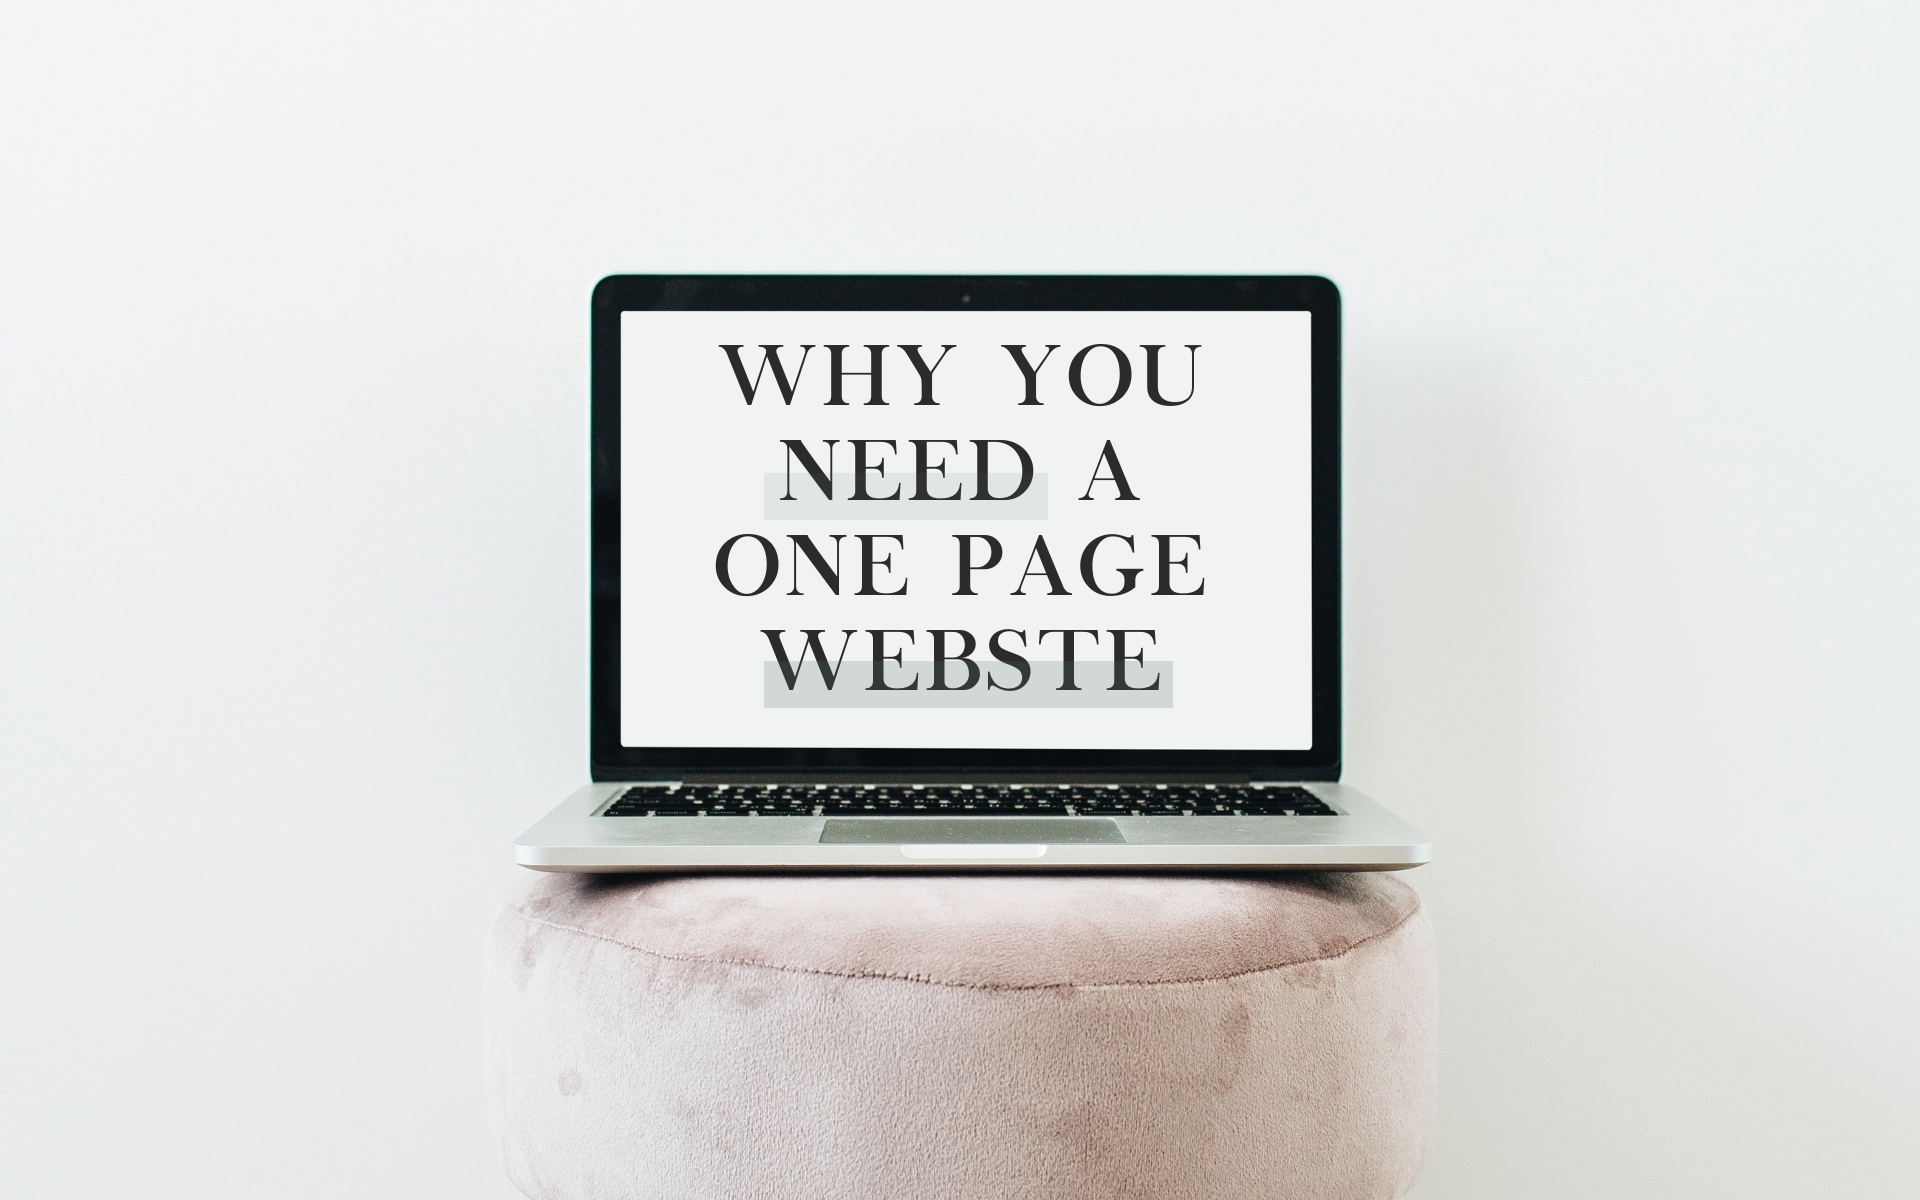 Why you need a one-page website